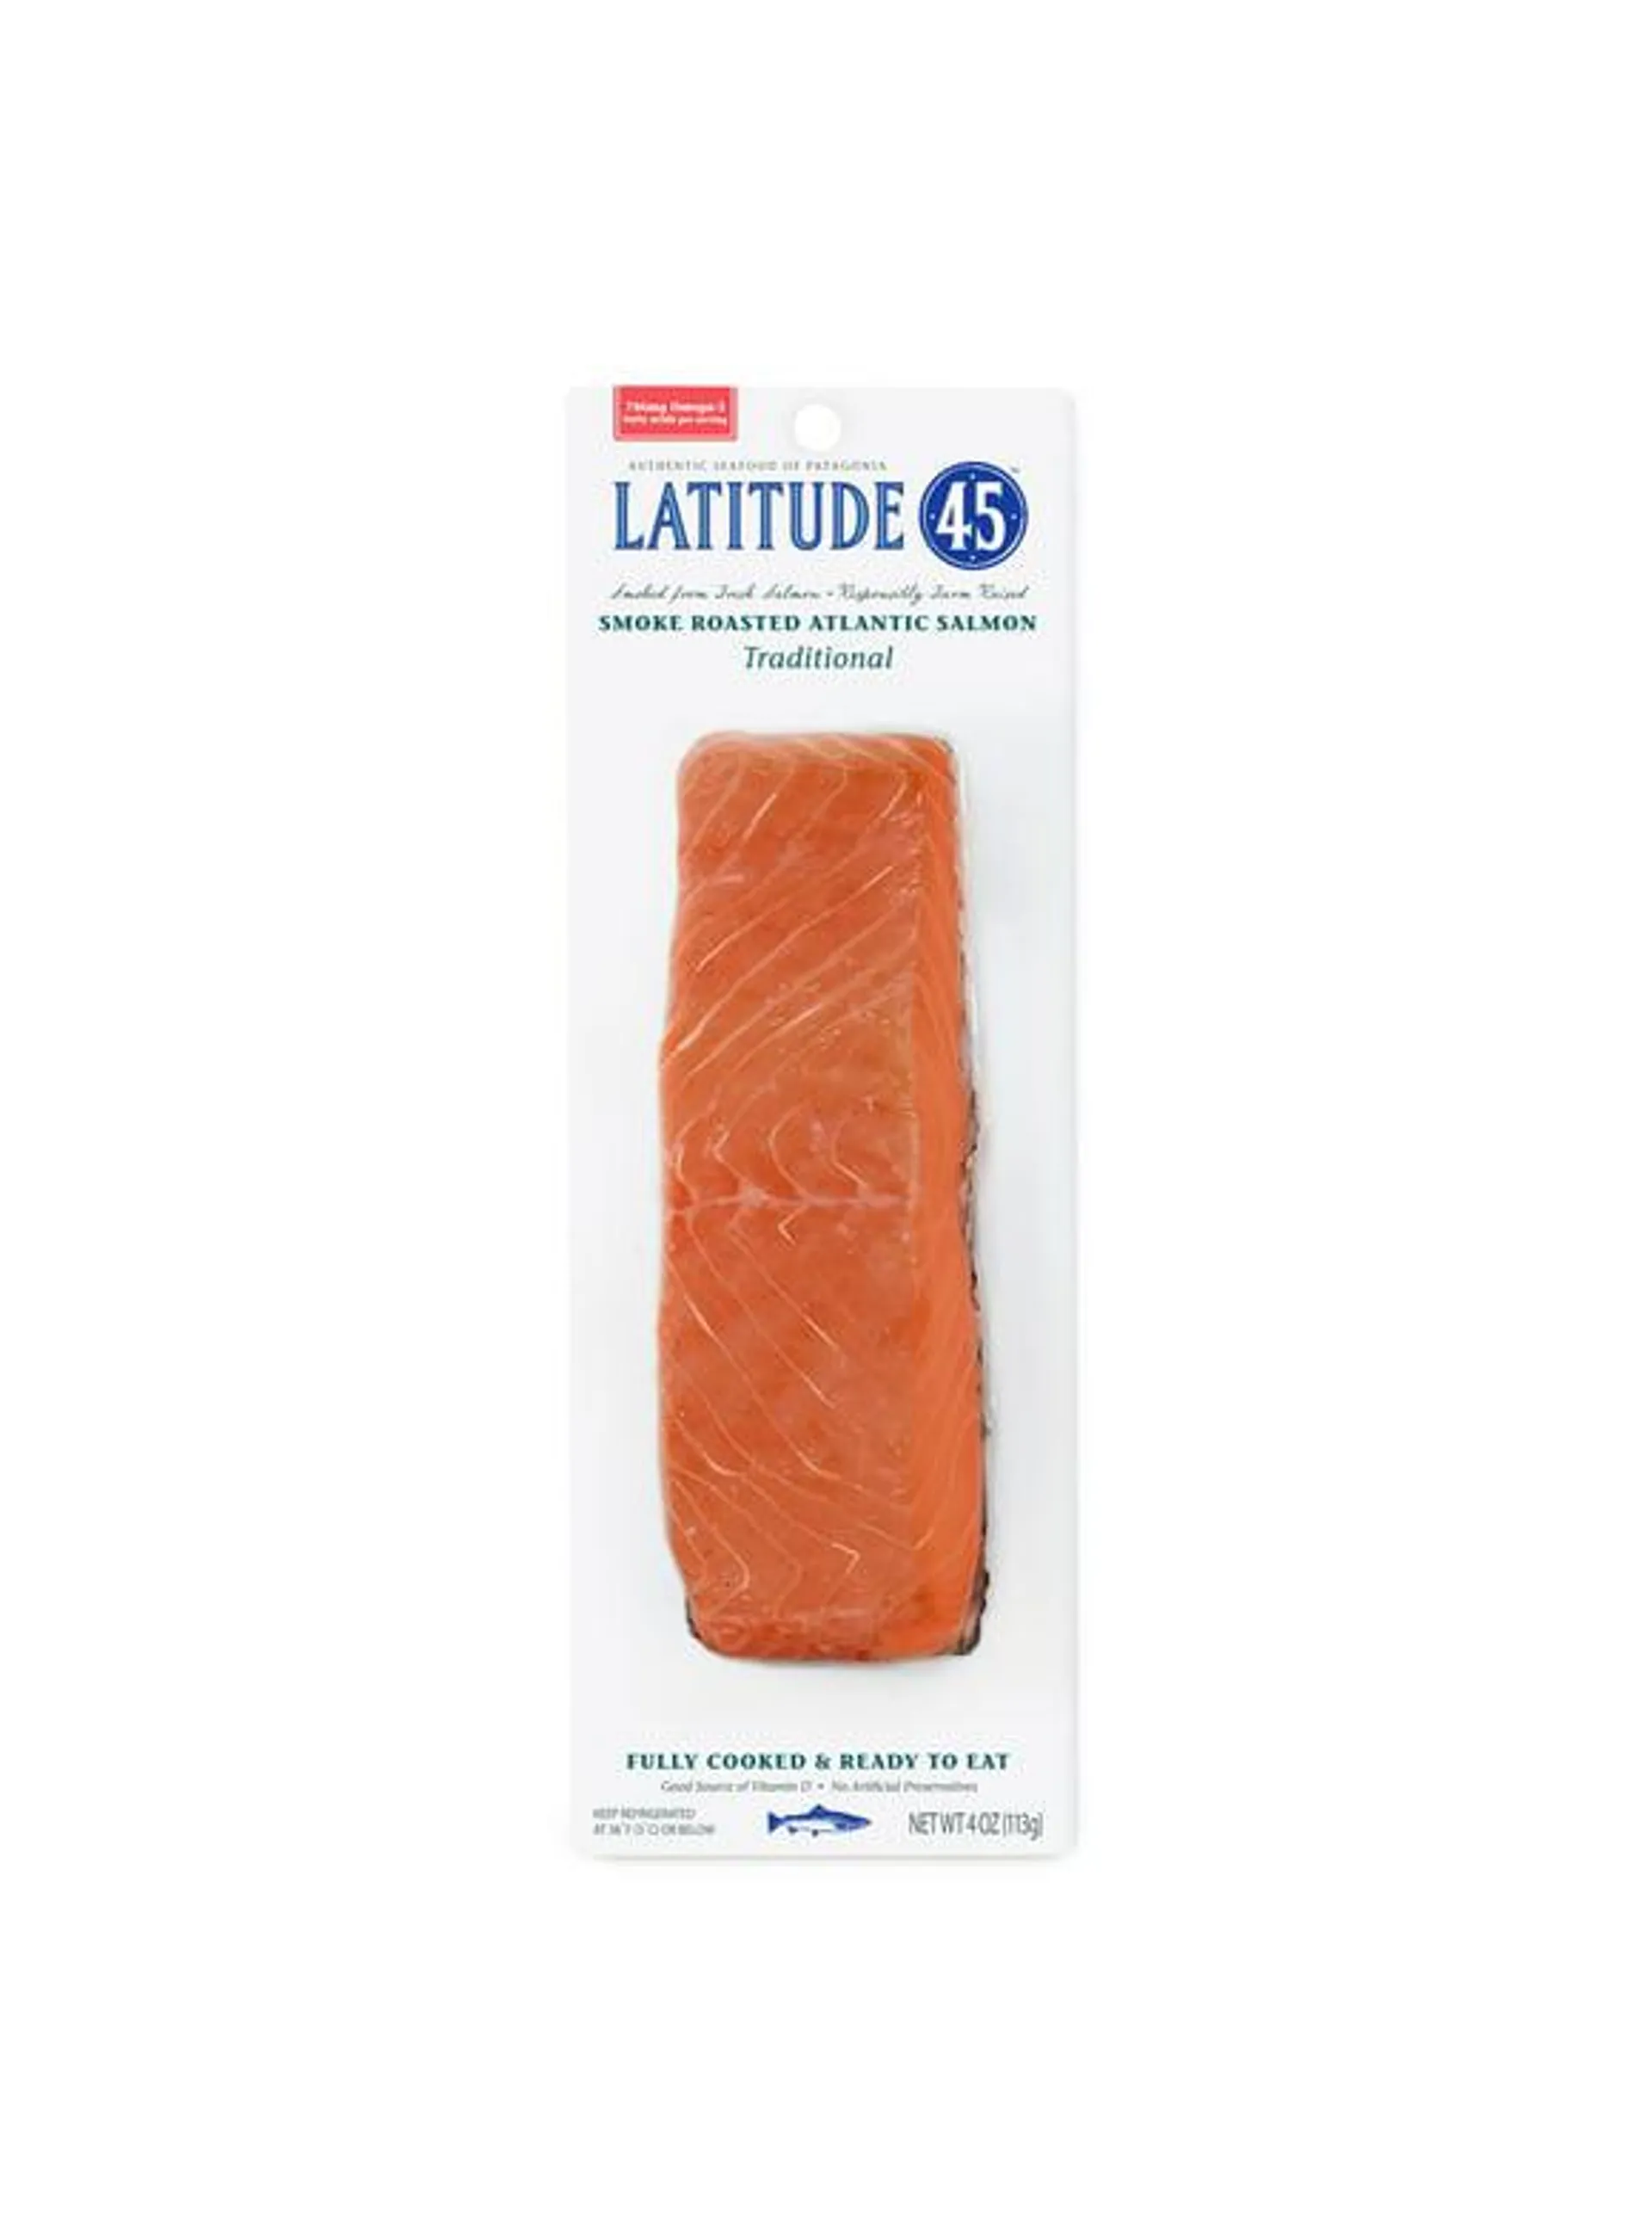 Latitude 45 Roasted Smoked Atlantic Salmon, 4oz package, 2 servings per container, serving size 2oz, 12g protein per serving.